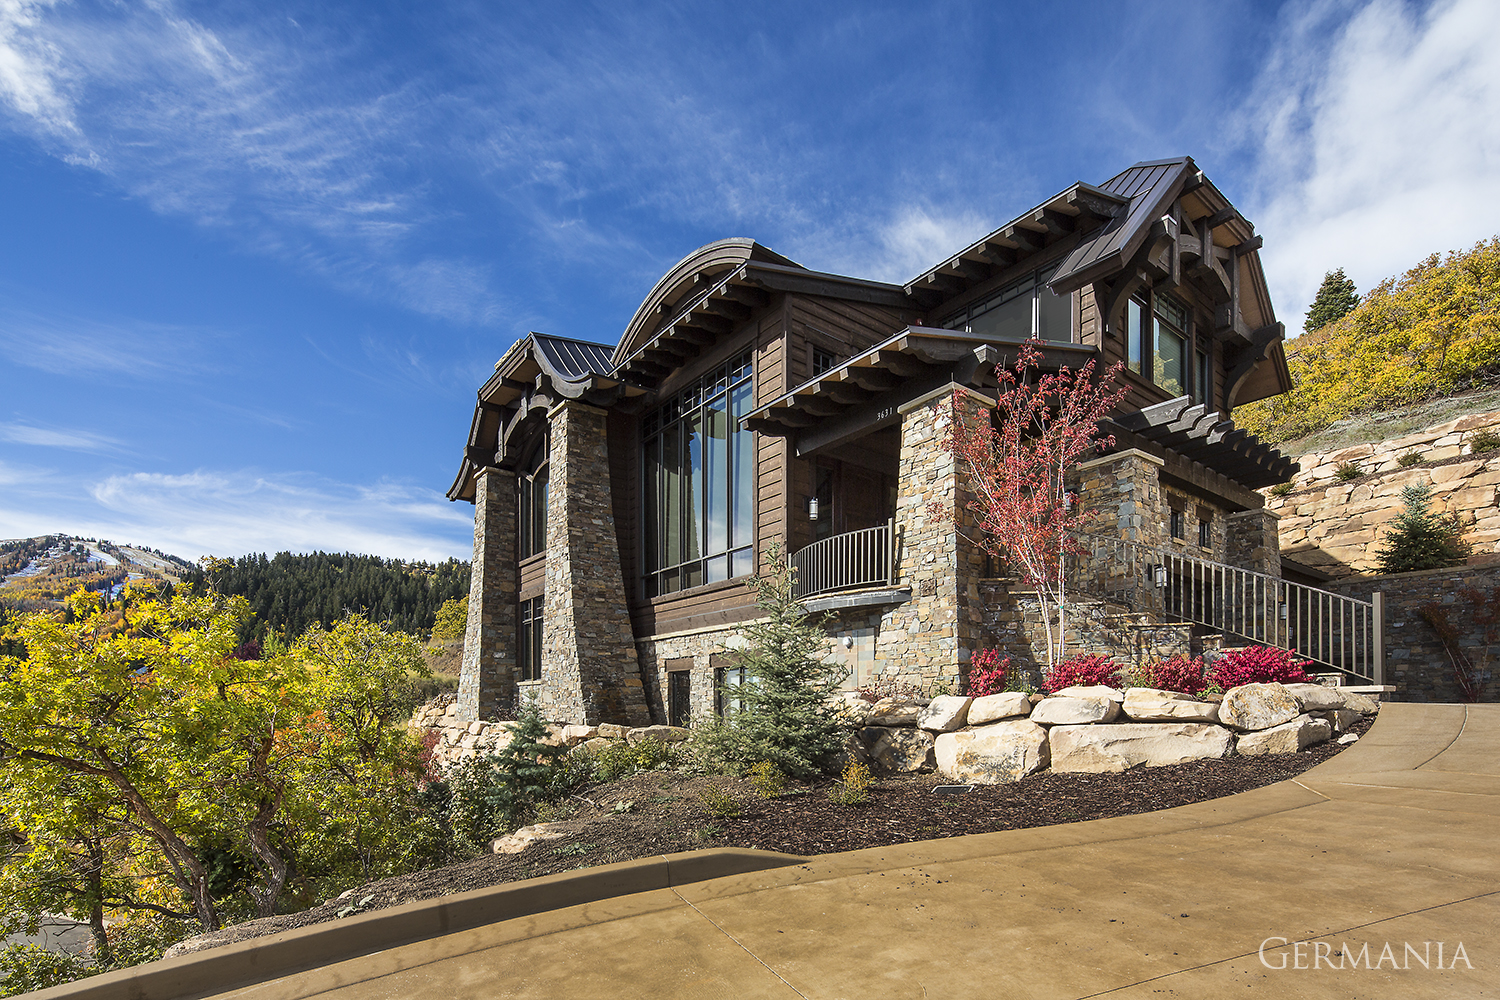 Looking for a custom home builder in Park City? Do you have something specific in mind, but are not sure you can find a builder that is flexible, responsive, and creative? Germania, a Park City custom home builder, is the perfect partner for you when it comes to creating a home that is uniquely yours. We work closely with our clients to create a home that reflects your individuality and creativity and is perfect down to every last detail